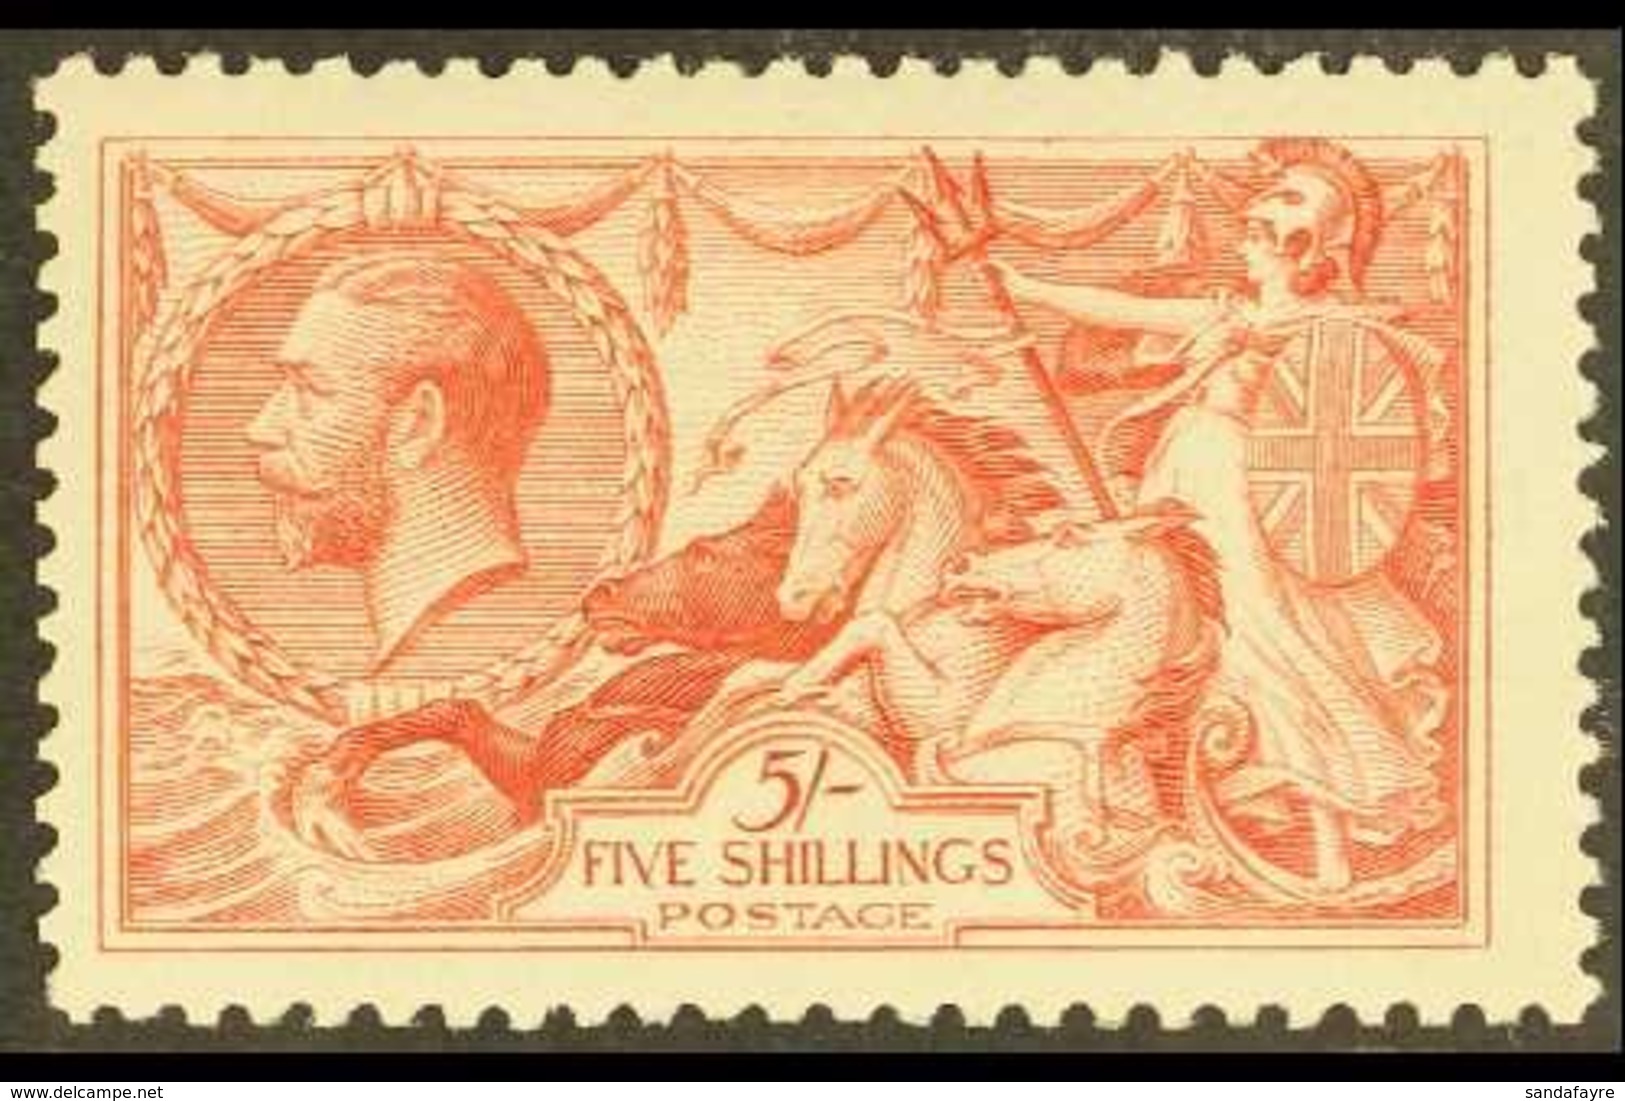 1918-19 5s Rose Red Seahorse, B.W. Printing, SG 416, Tiny Pinhole At Base, Otherwise Never Hinged Mint, Cat.£475. For Mo - Unclassified